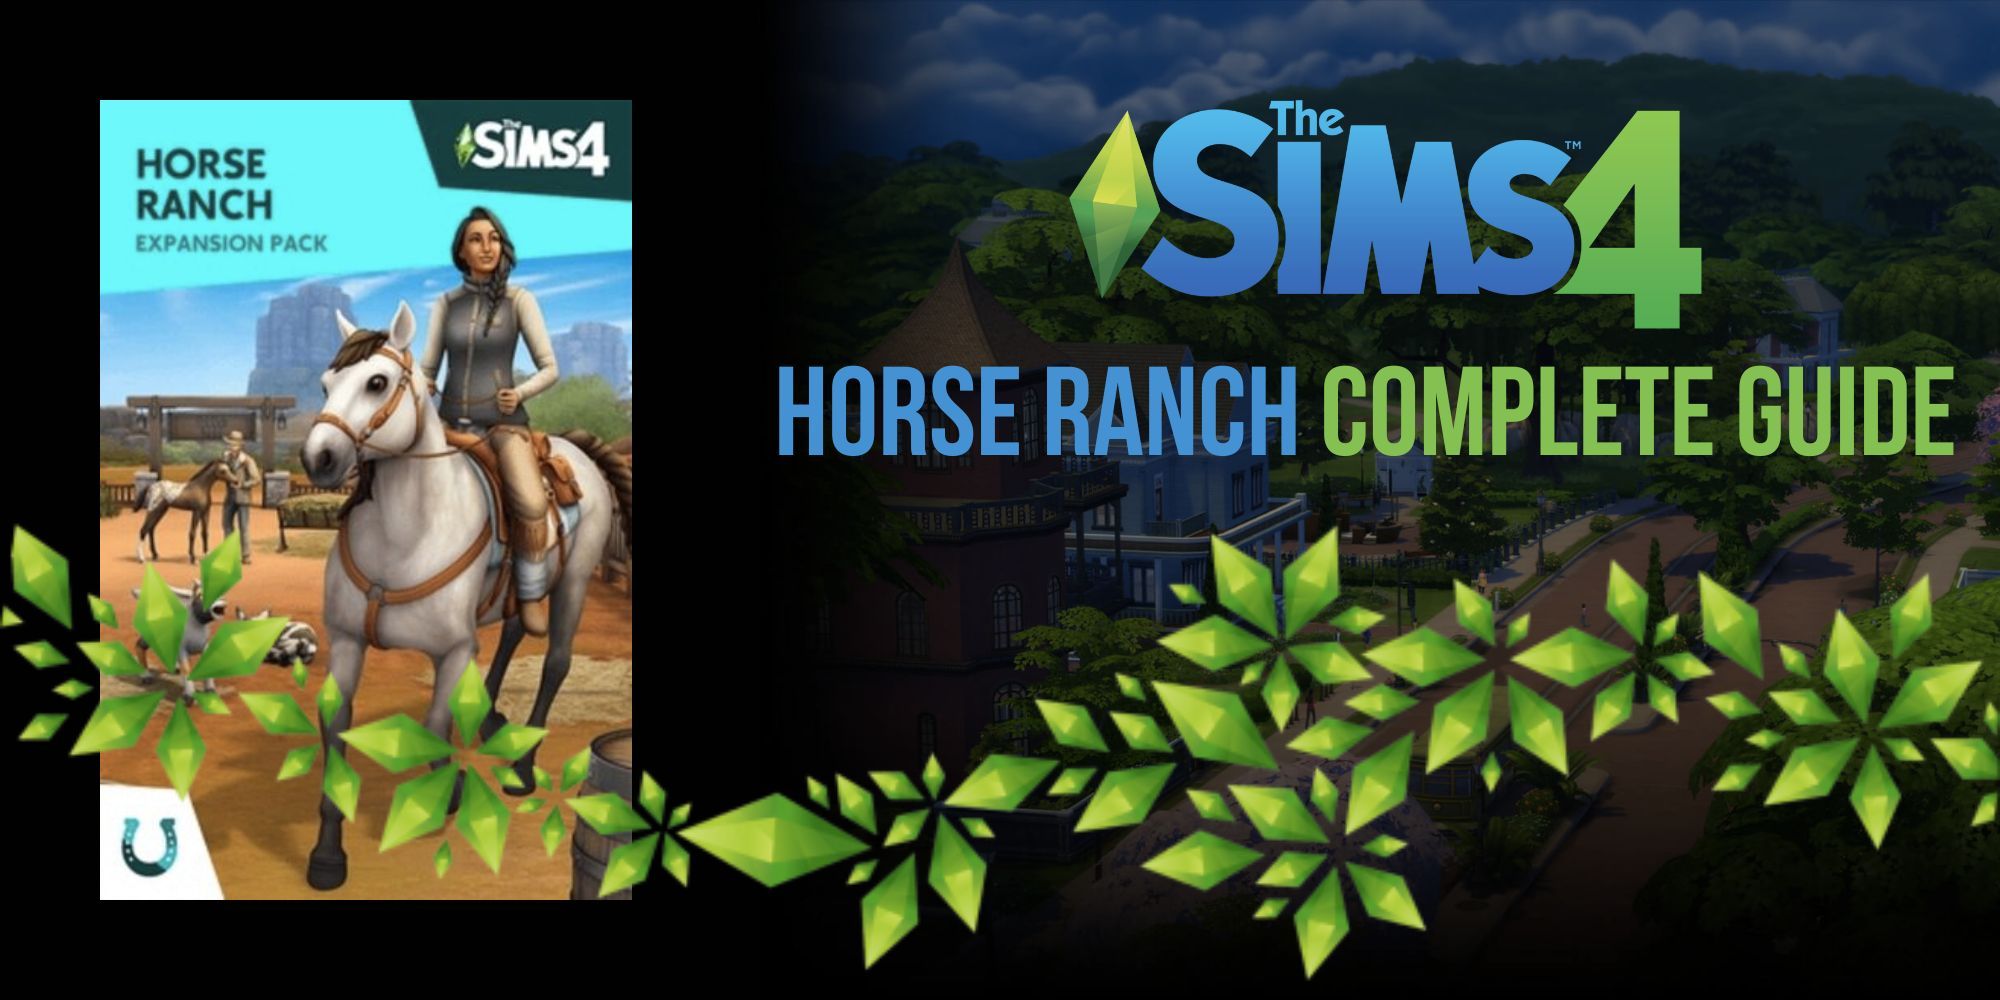 The Sims 4 Horse Ranch Complete Guide